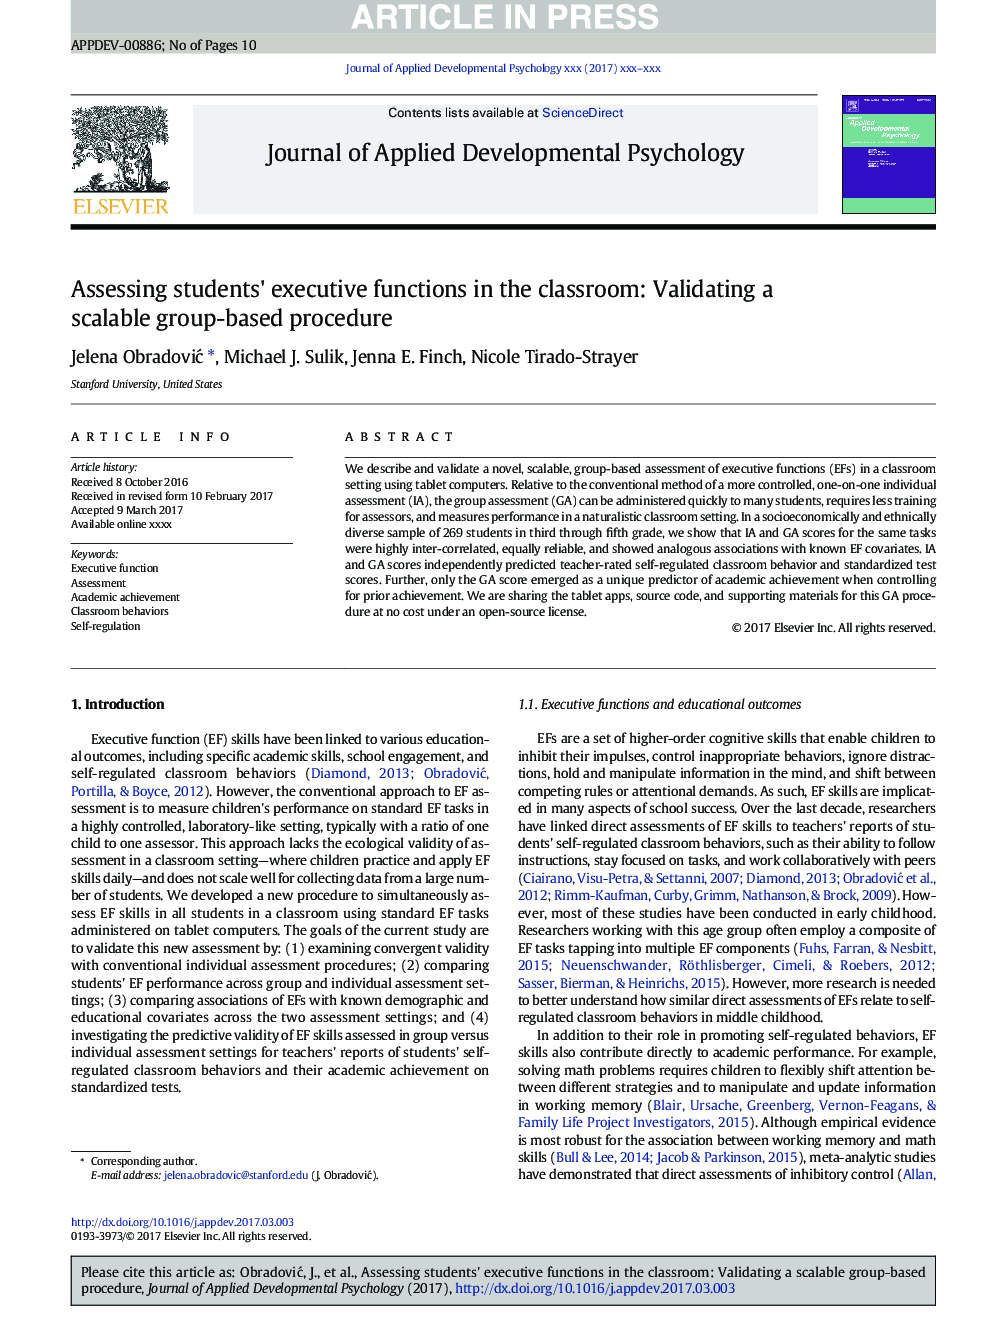 Assessing students' executive functions in the classroom: Validating a scalable group-based procedure